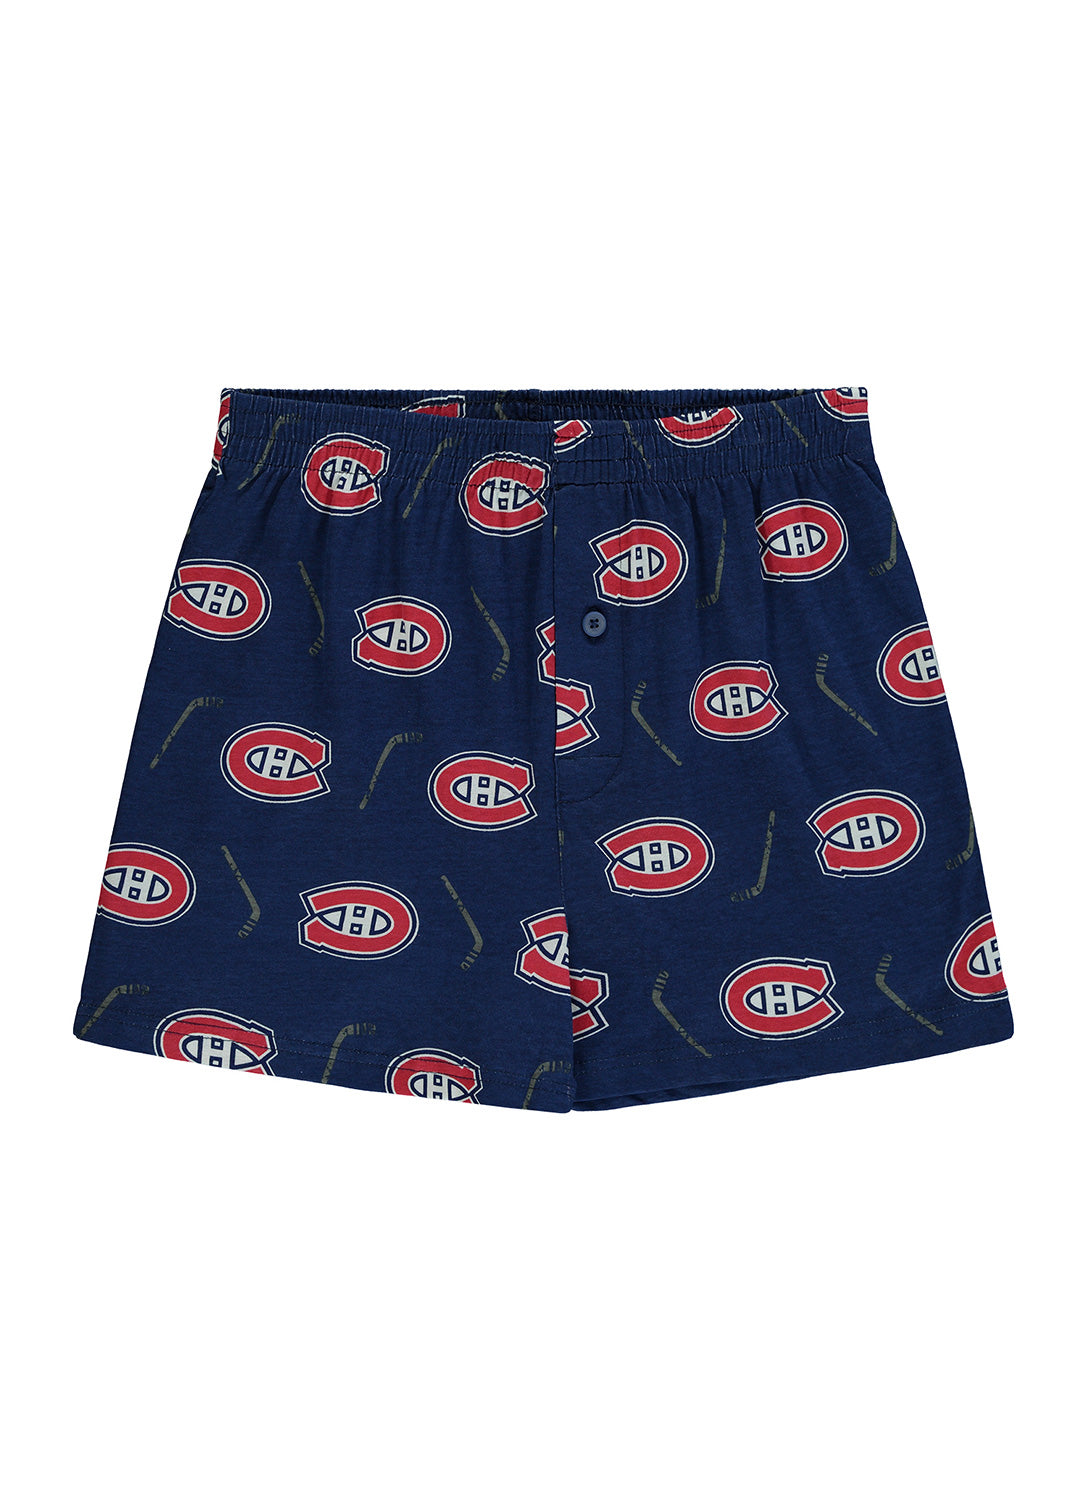 Mens boxers with Montreal Canadiens print (navy)